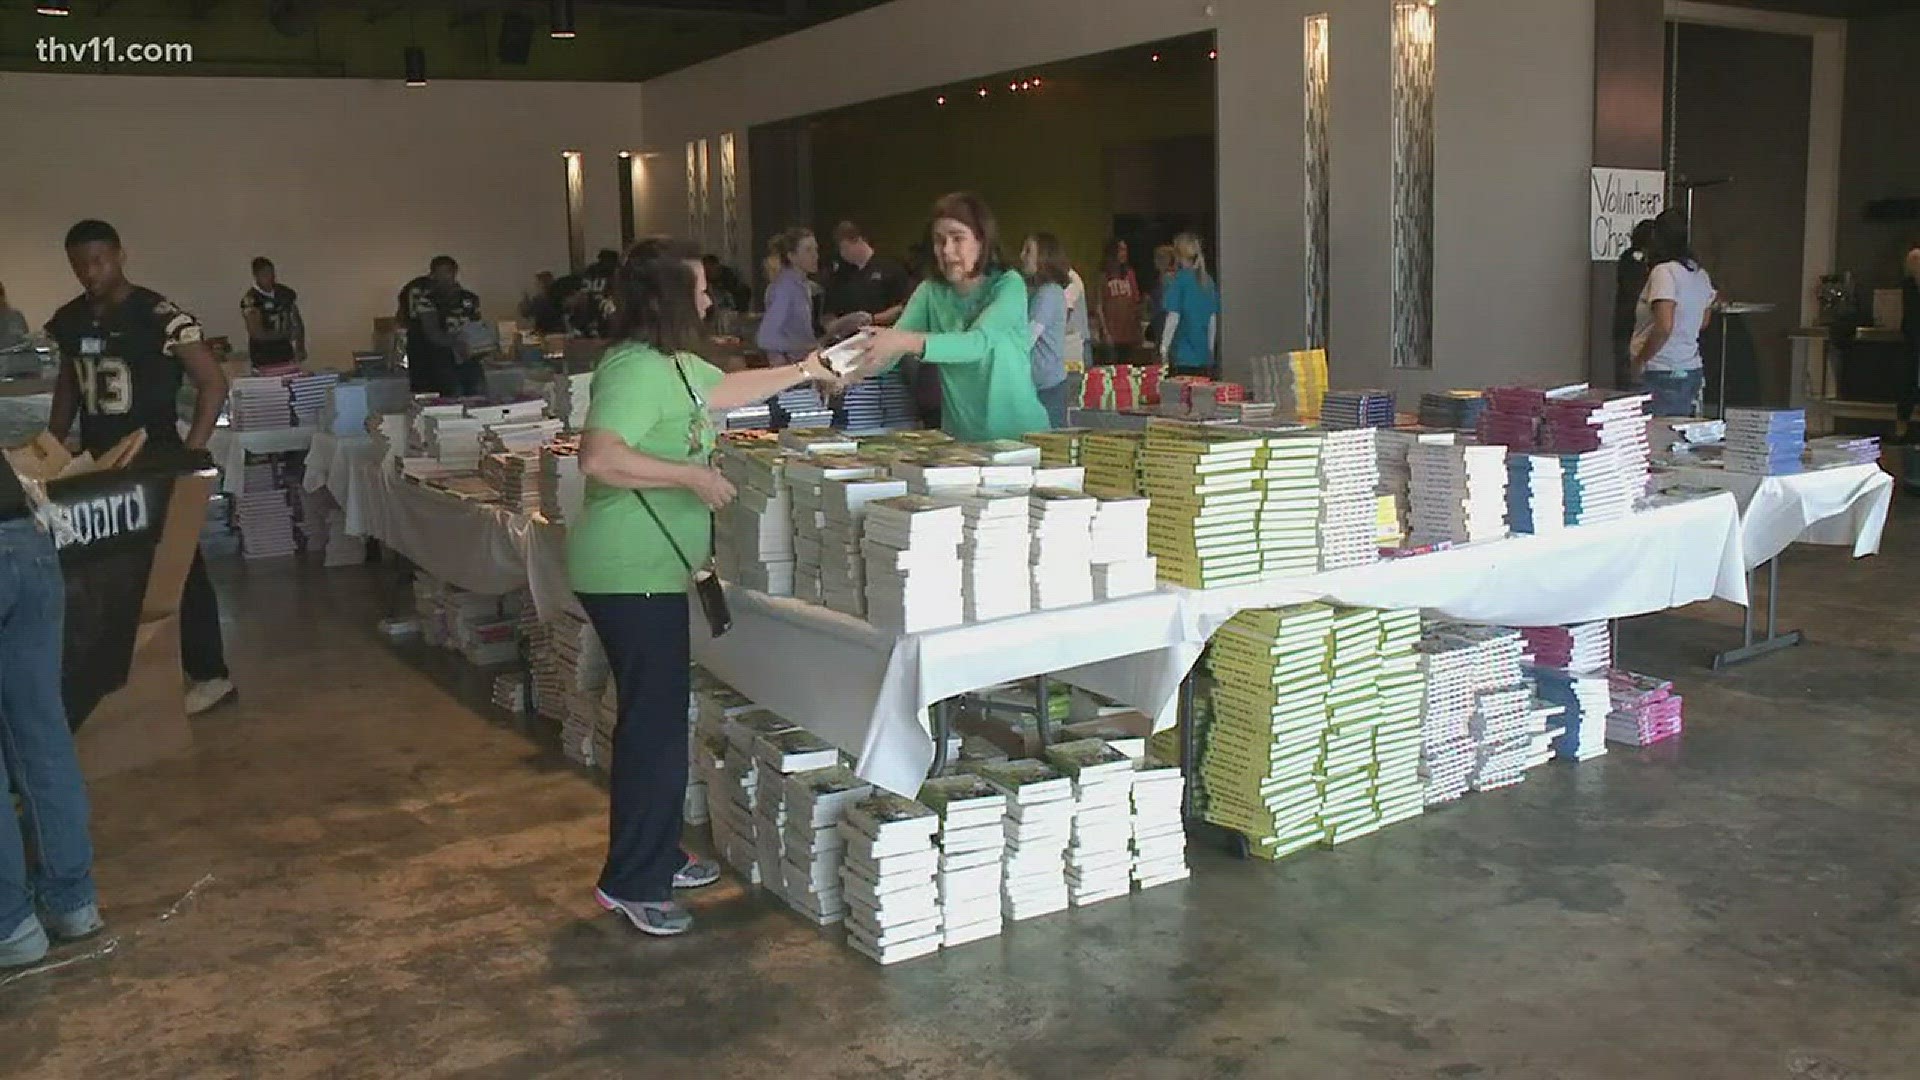 A sorority is donating books to Little Rock because less than 38% of Little Rock students are achieving their reading marks.